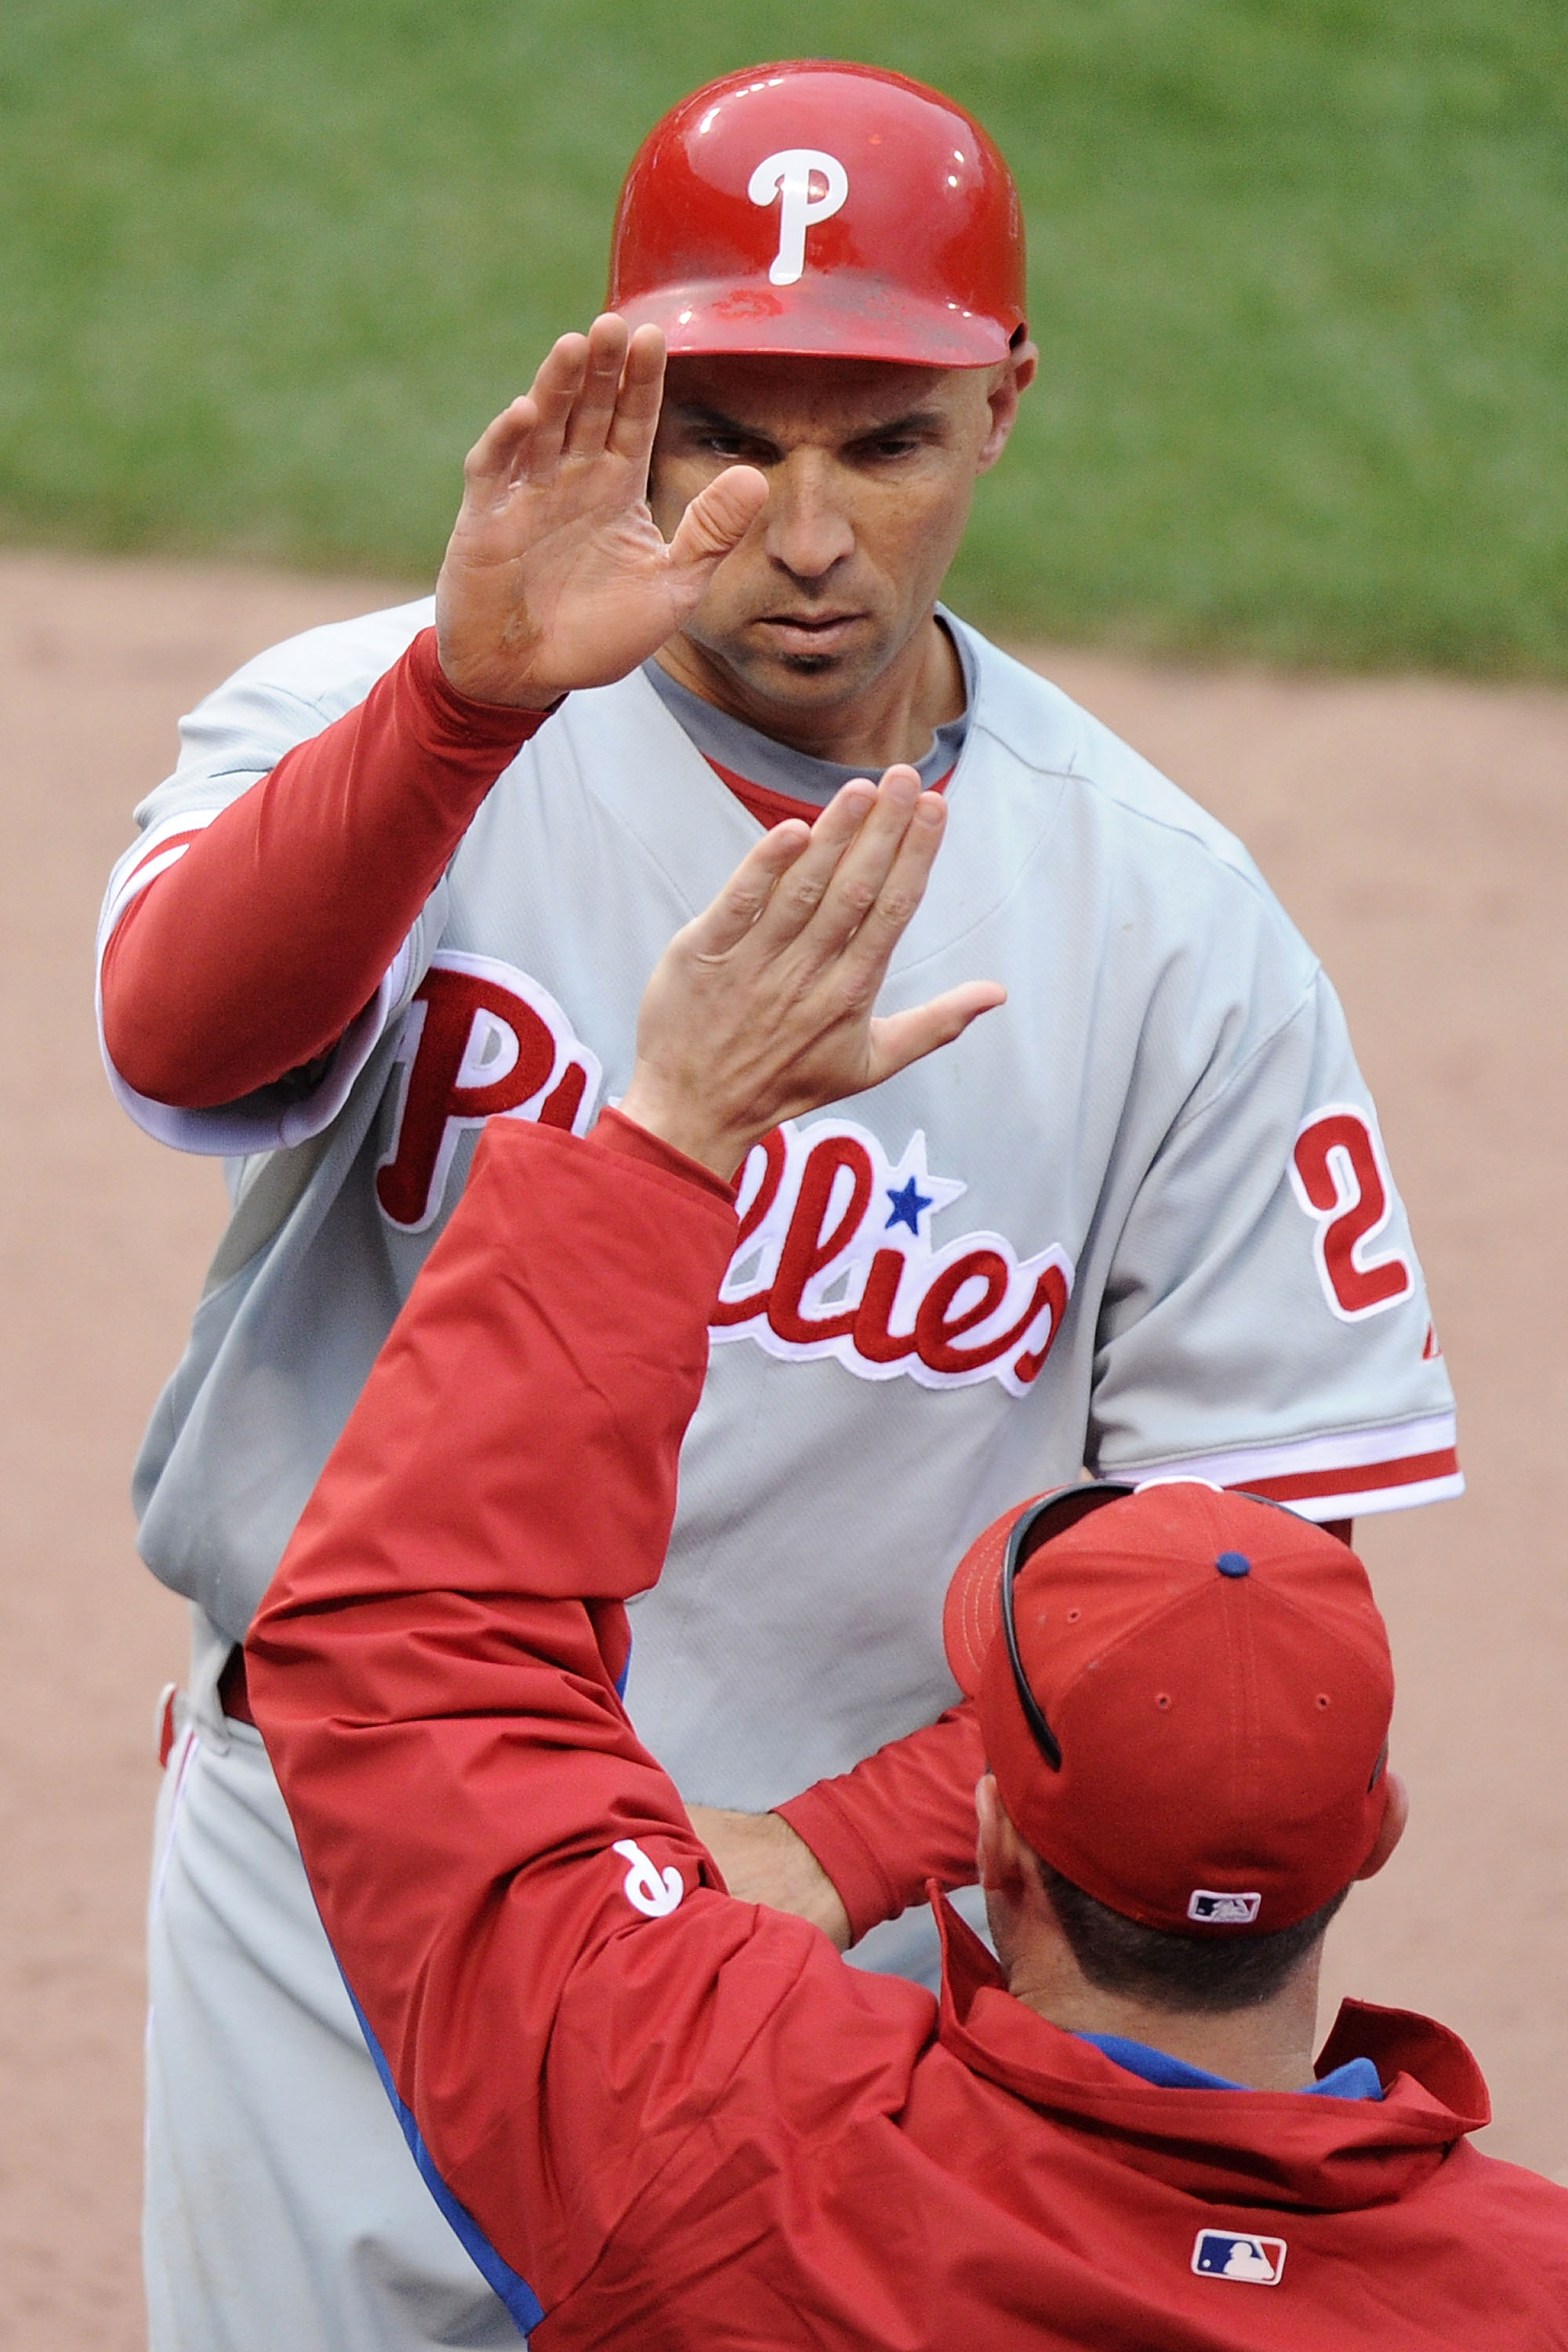 Philadelphia Phillies: Why They Were Right Not to Re-Sign Jayson